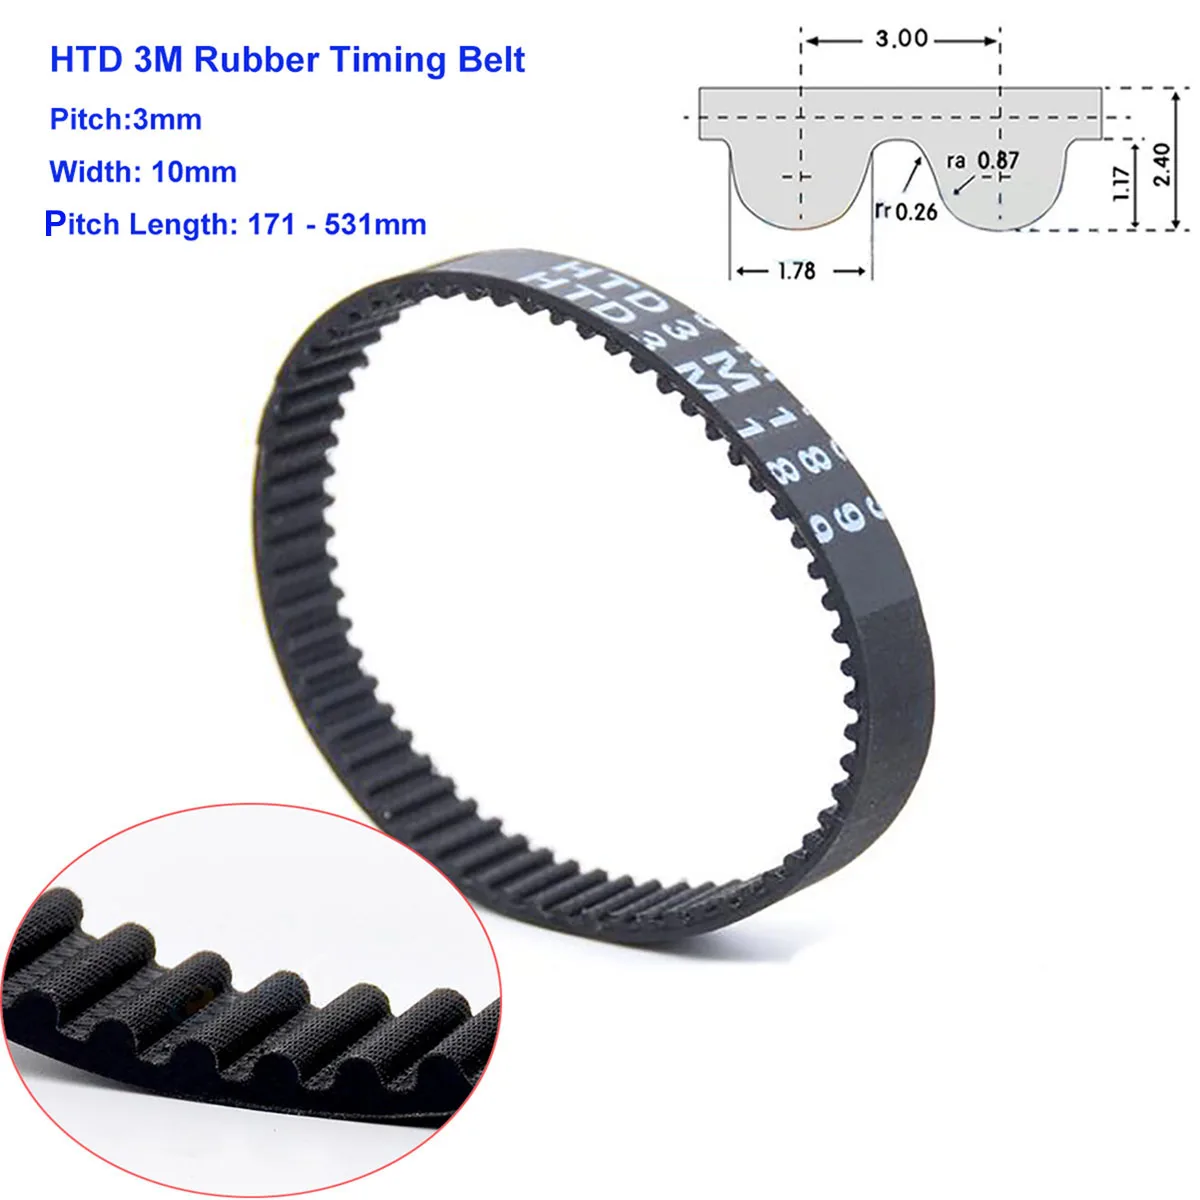 

1pcs Width 10mm HTD 3M Rubber Arc Tooth Timing Belt Pitch Length 279 351 357mm Transmission Belt Pitch 3mm Closed Loop